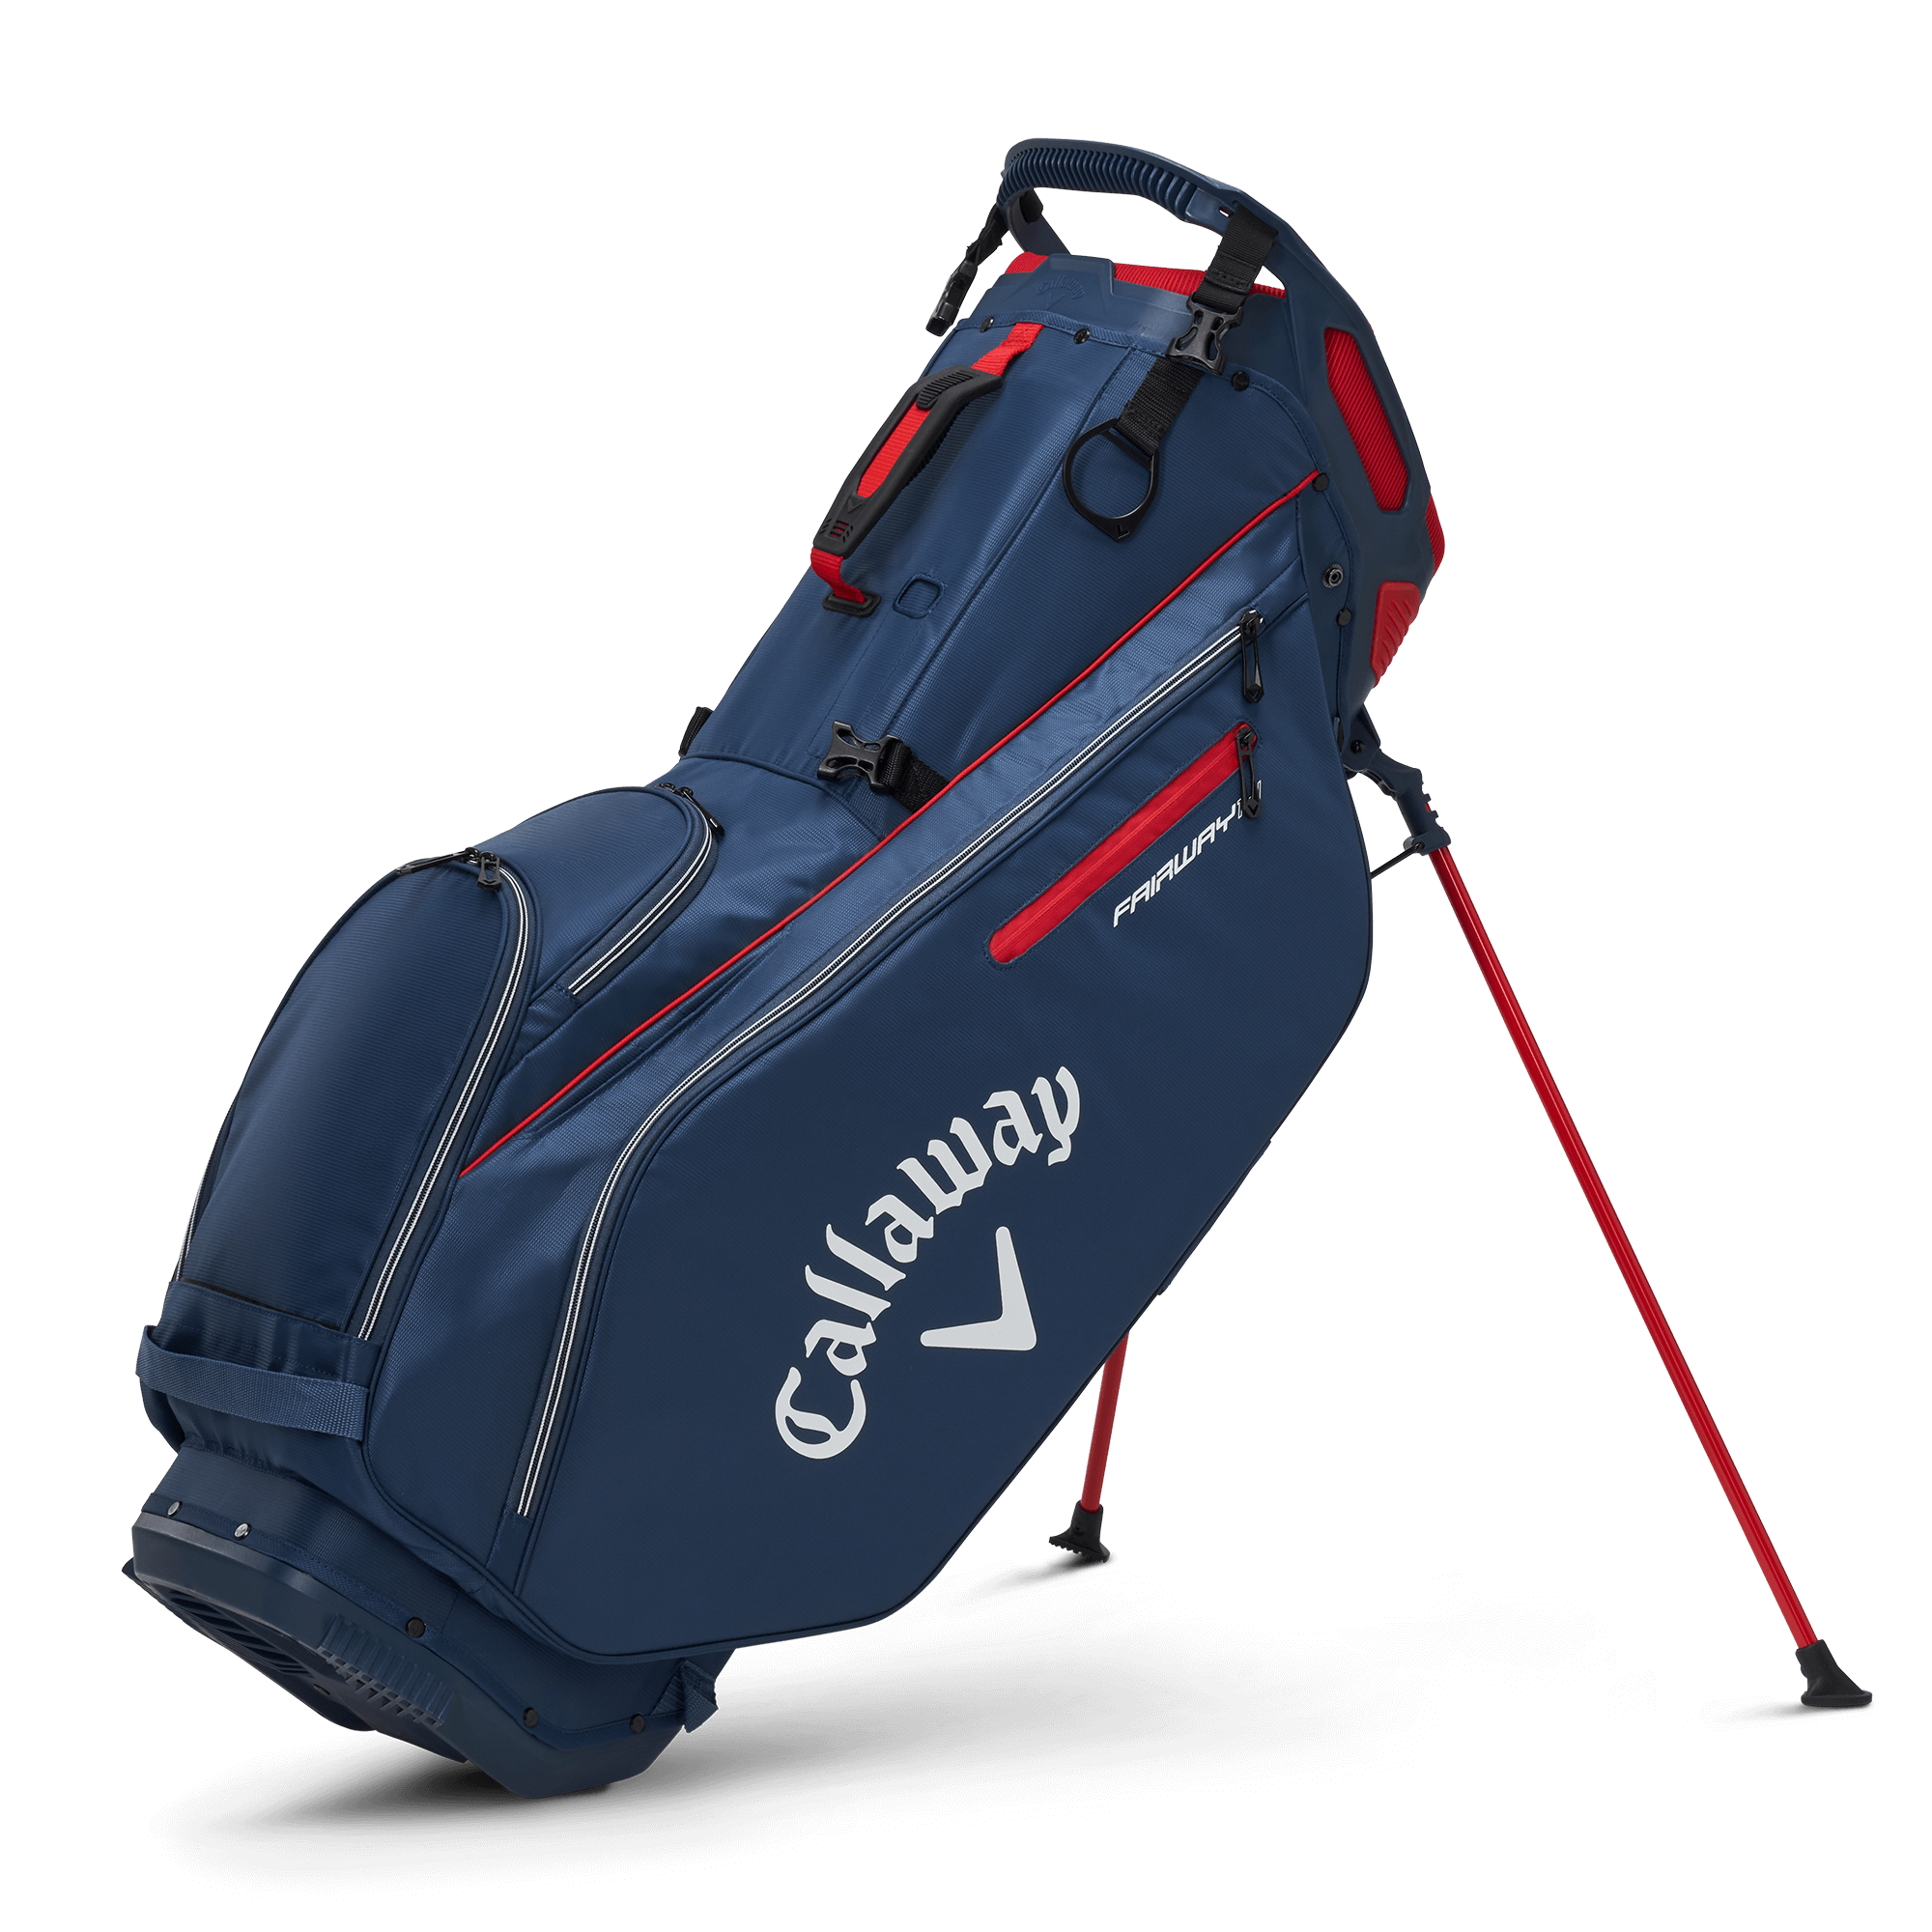 Golf Bags For Sale - Shop Best Prices Online | PGA TOUR Superstore